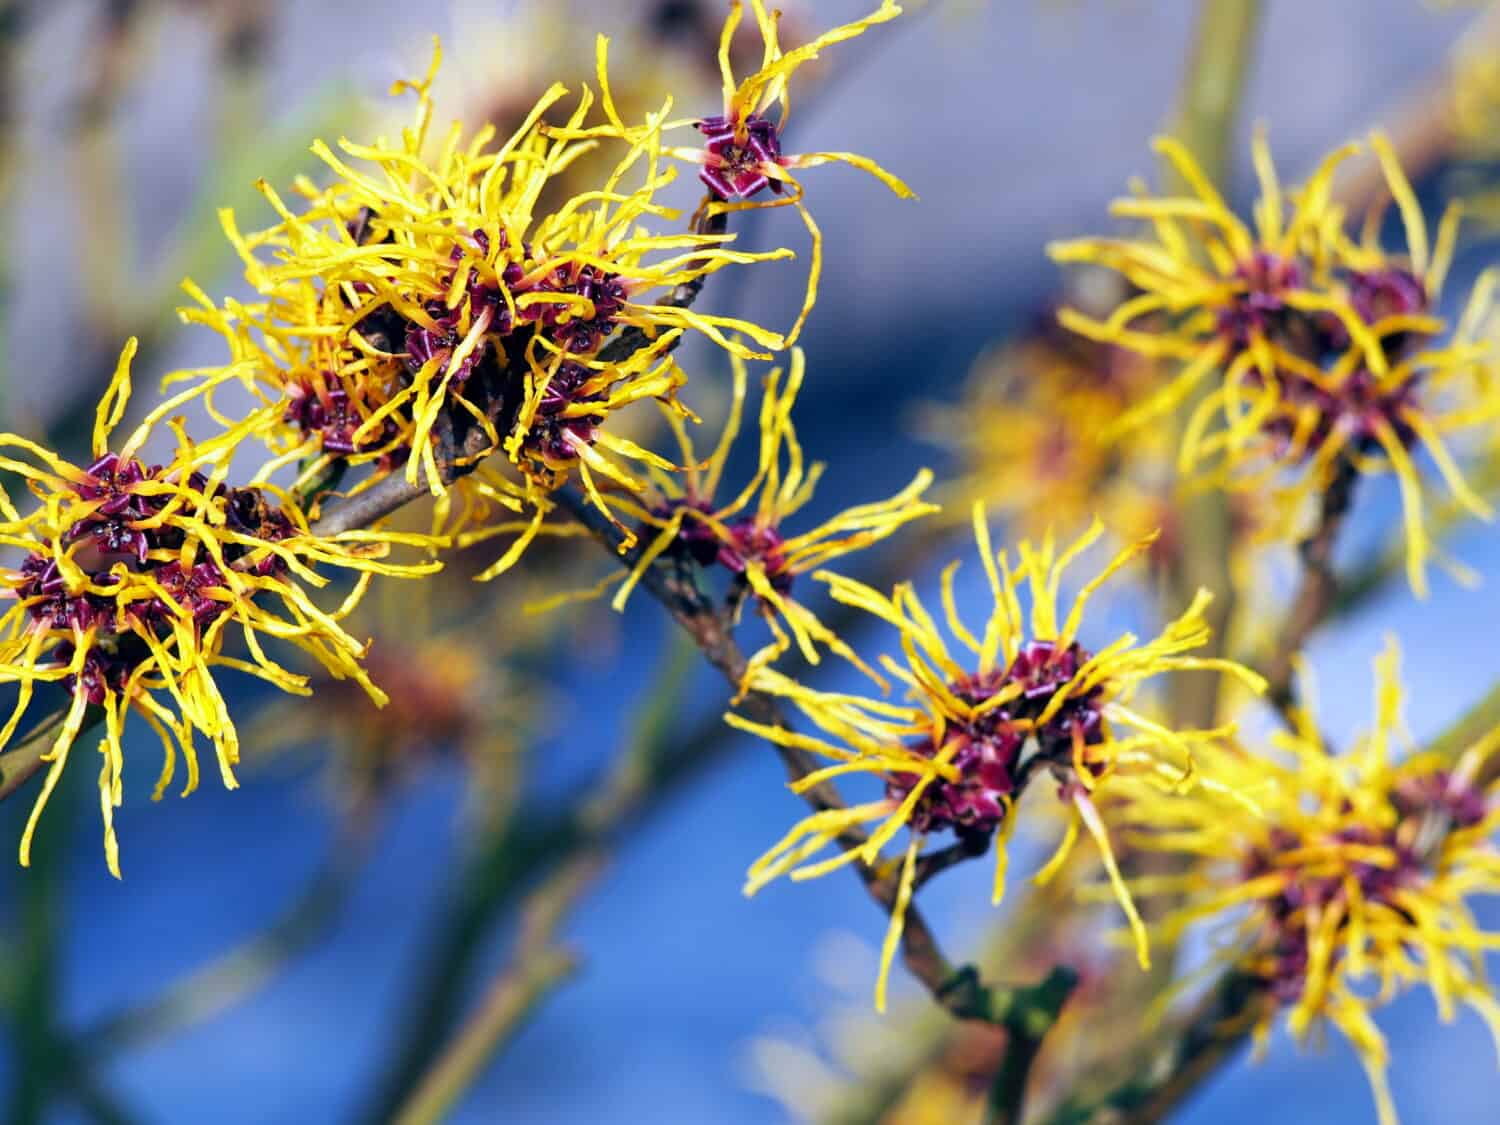 Yellow and burgundy inflorescences of Witch hazel. Hamamelis in full bloom.